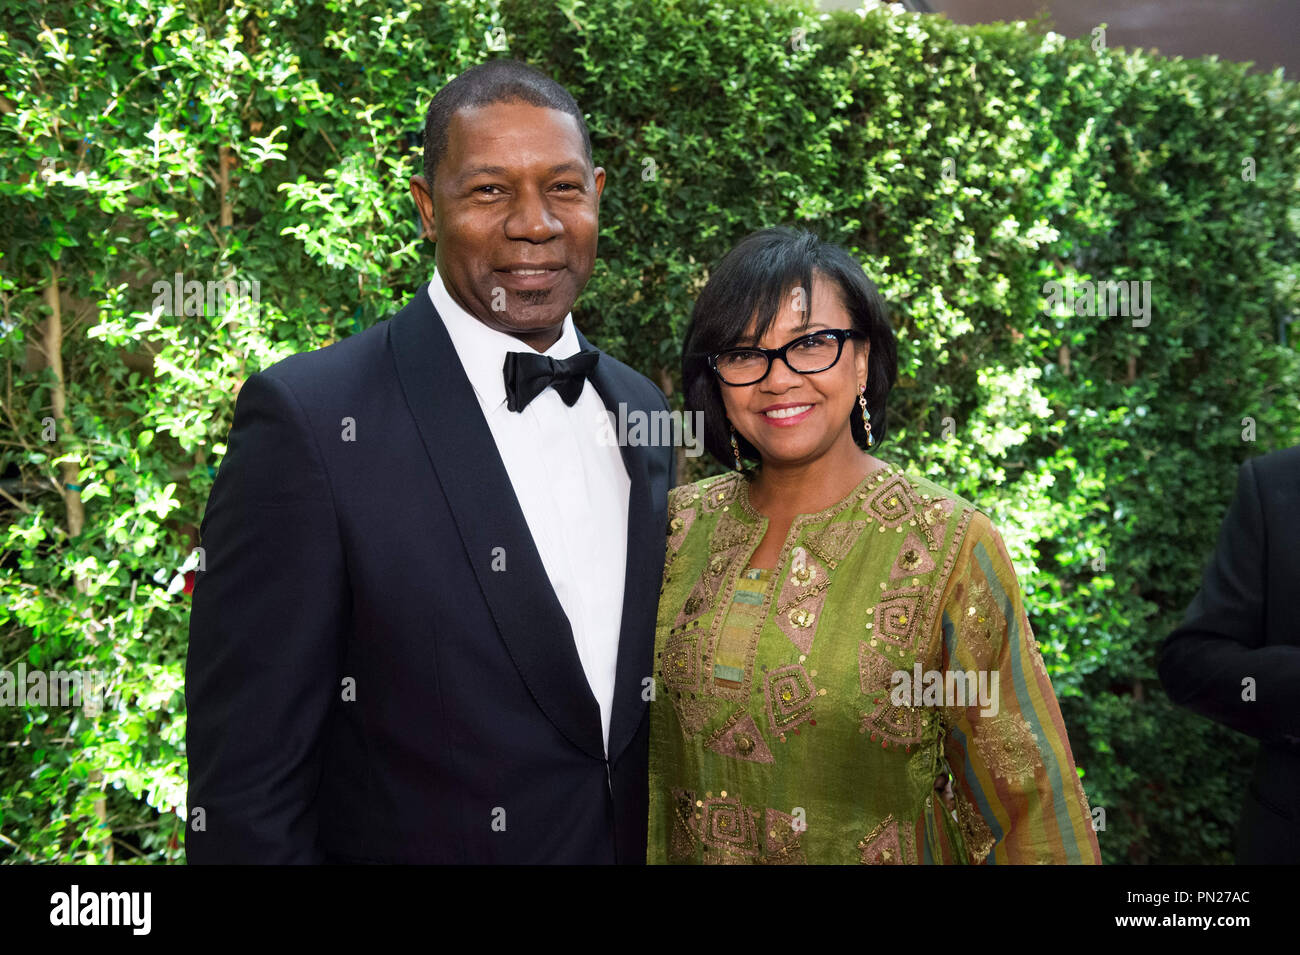 Dennis Haysbert (left) and Academy President Cheryl Boone Isaacs attend the 6th Annual Governors Awards in The Ray Dolby Ballroom at Hollywood & Highland Center® in Hollywood, CA, on Saturday, November 8, 2014.  File Reference # 32487 141THA  For Editorial Use Only -  All Rights Reserved Stock Photo